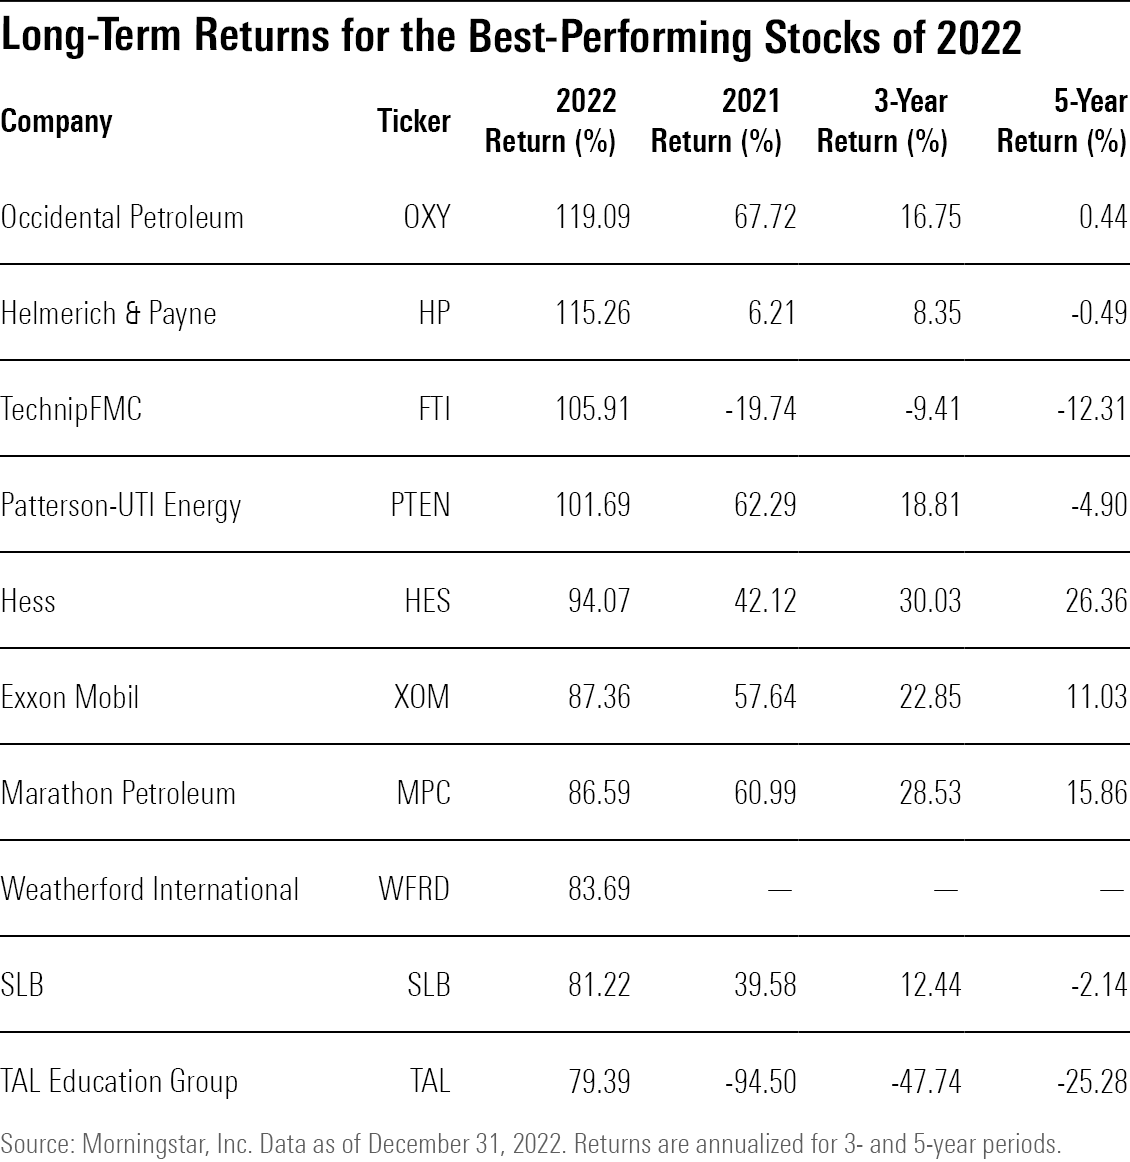 A table showing long-term returns of the best-performing U.S.-listed stocks among those covered by Morningstar analysts.